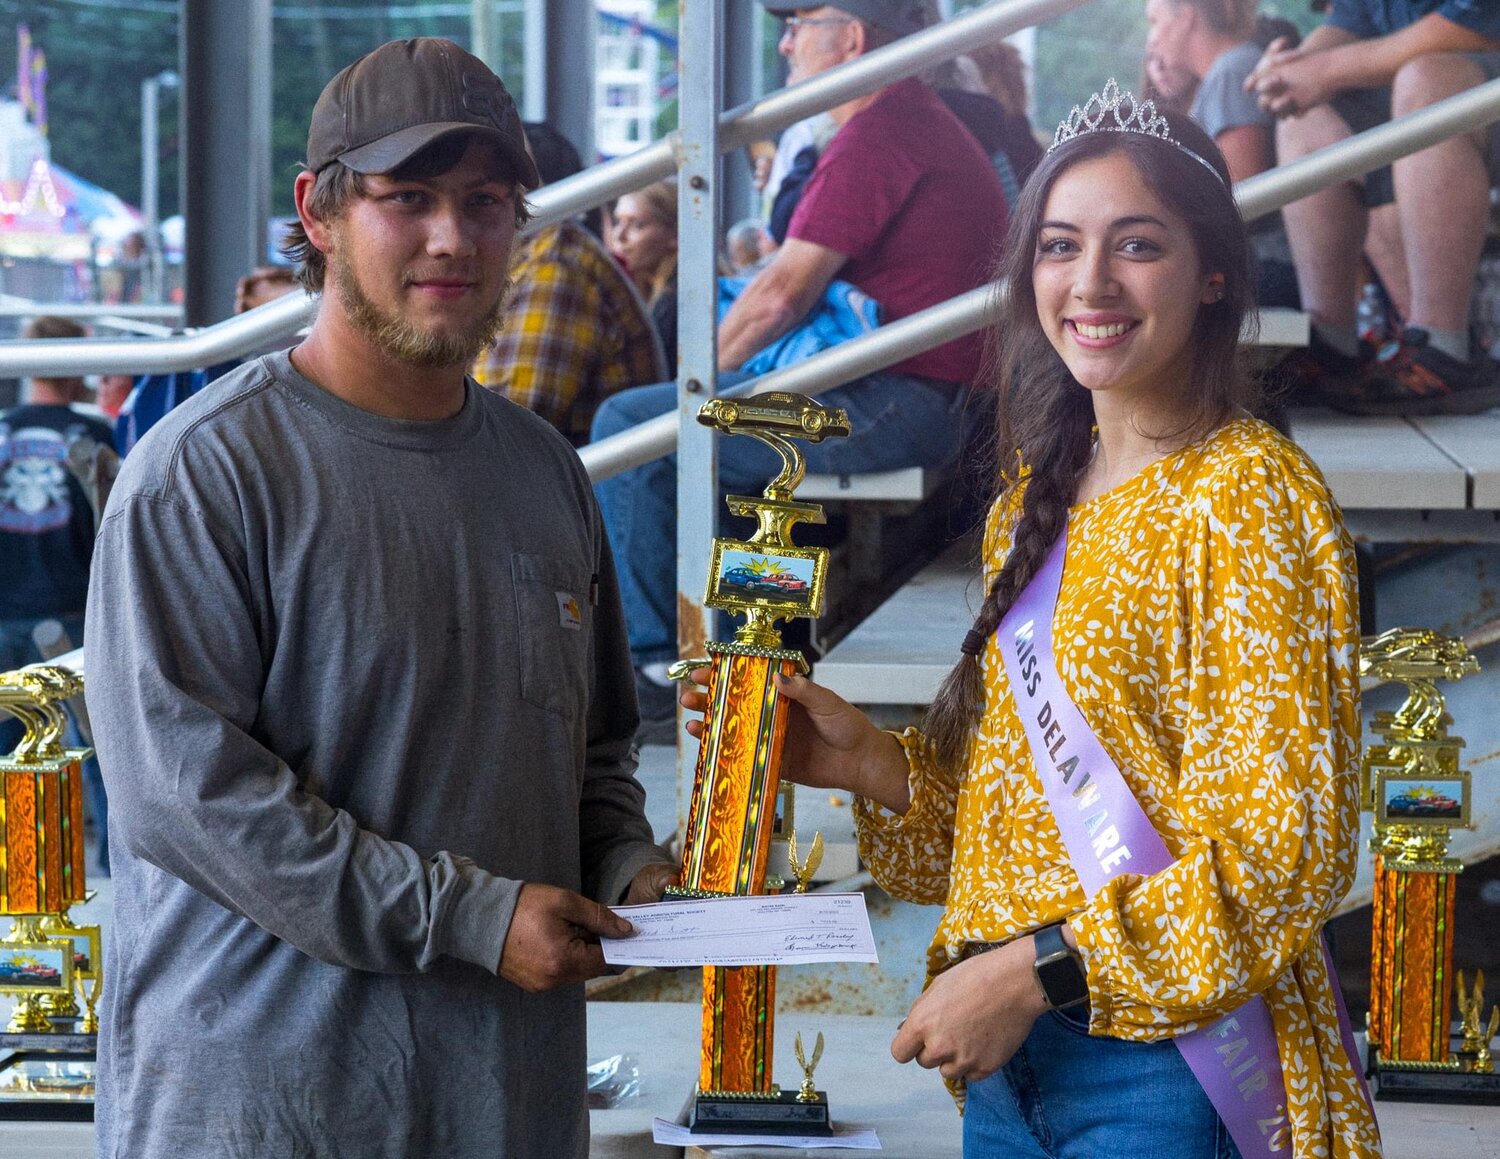 Among the duties of Miss Delaware County is presenting trophies for winners of the demolition derby at the fair.